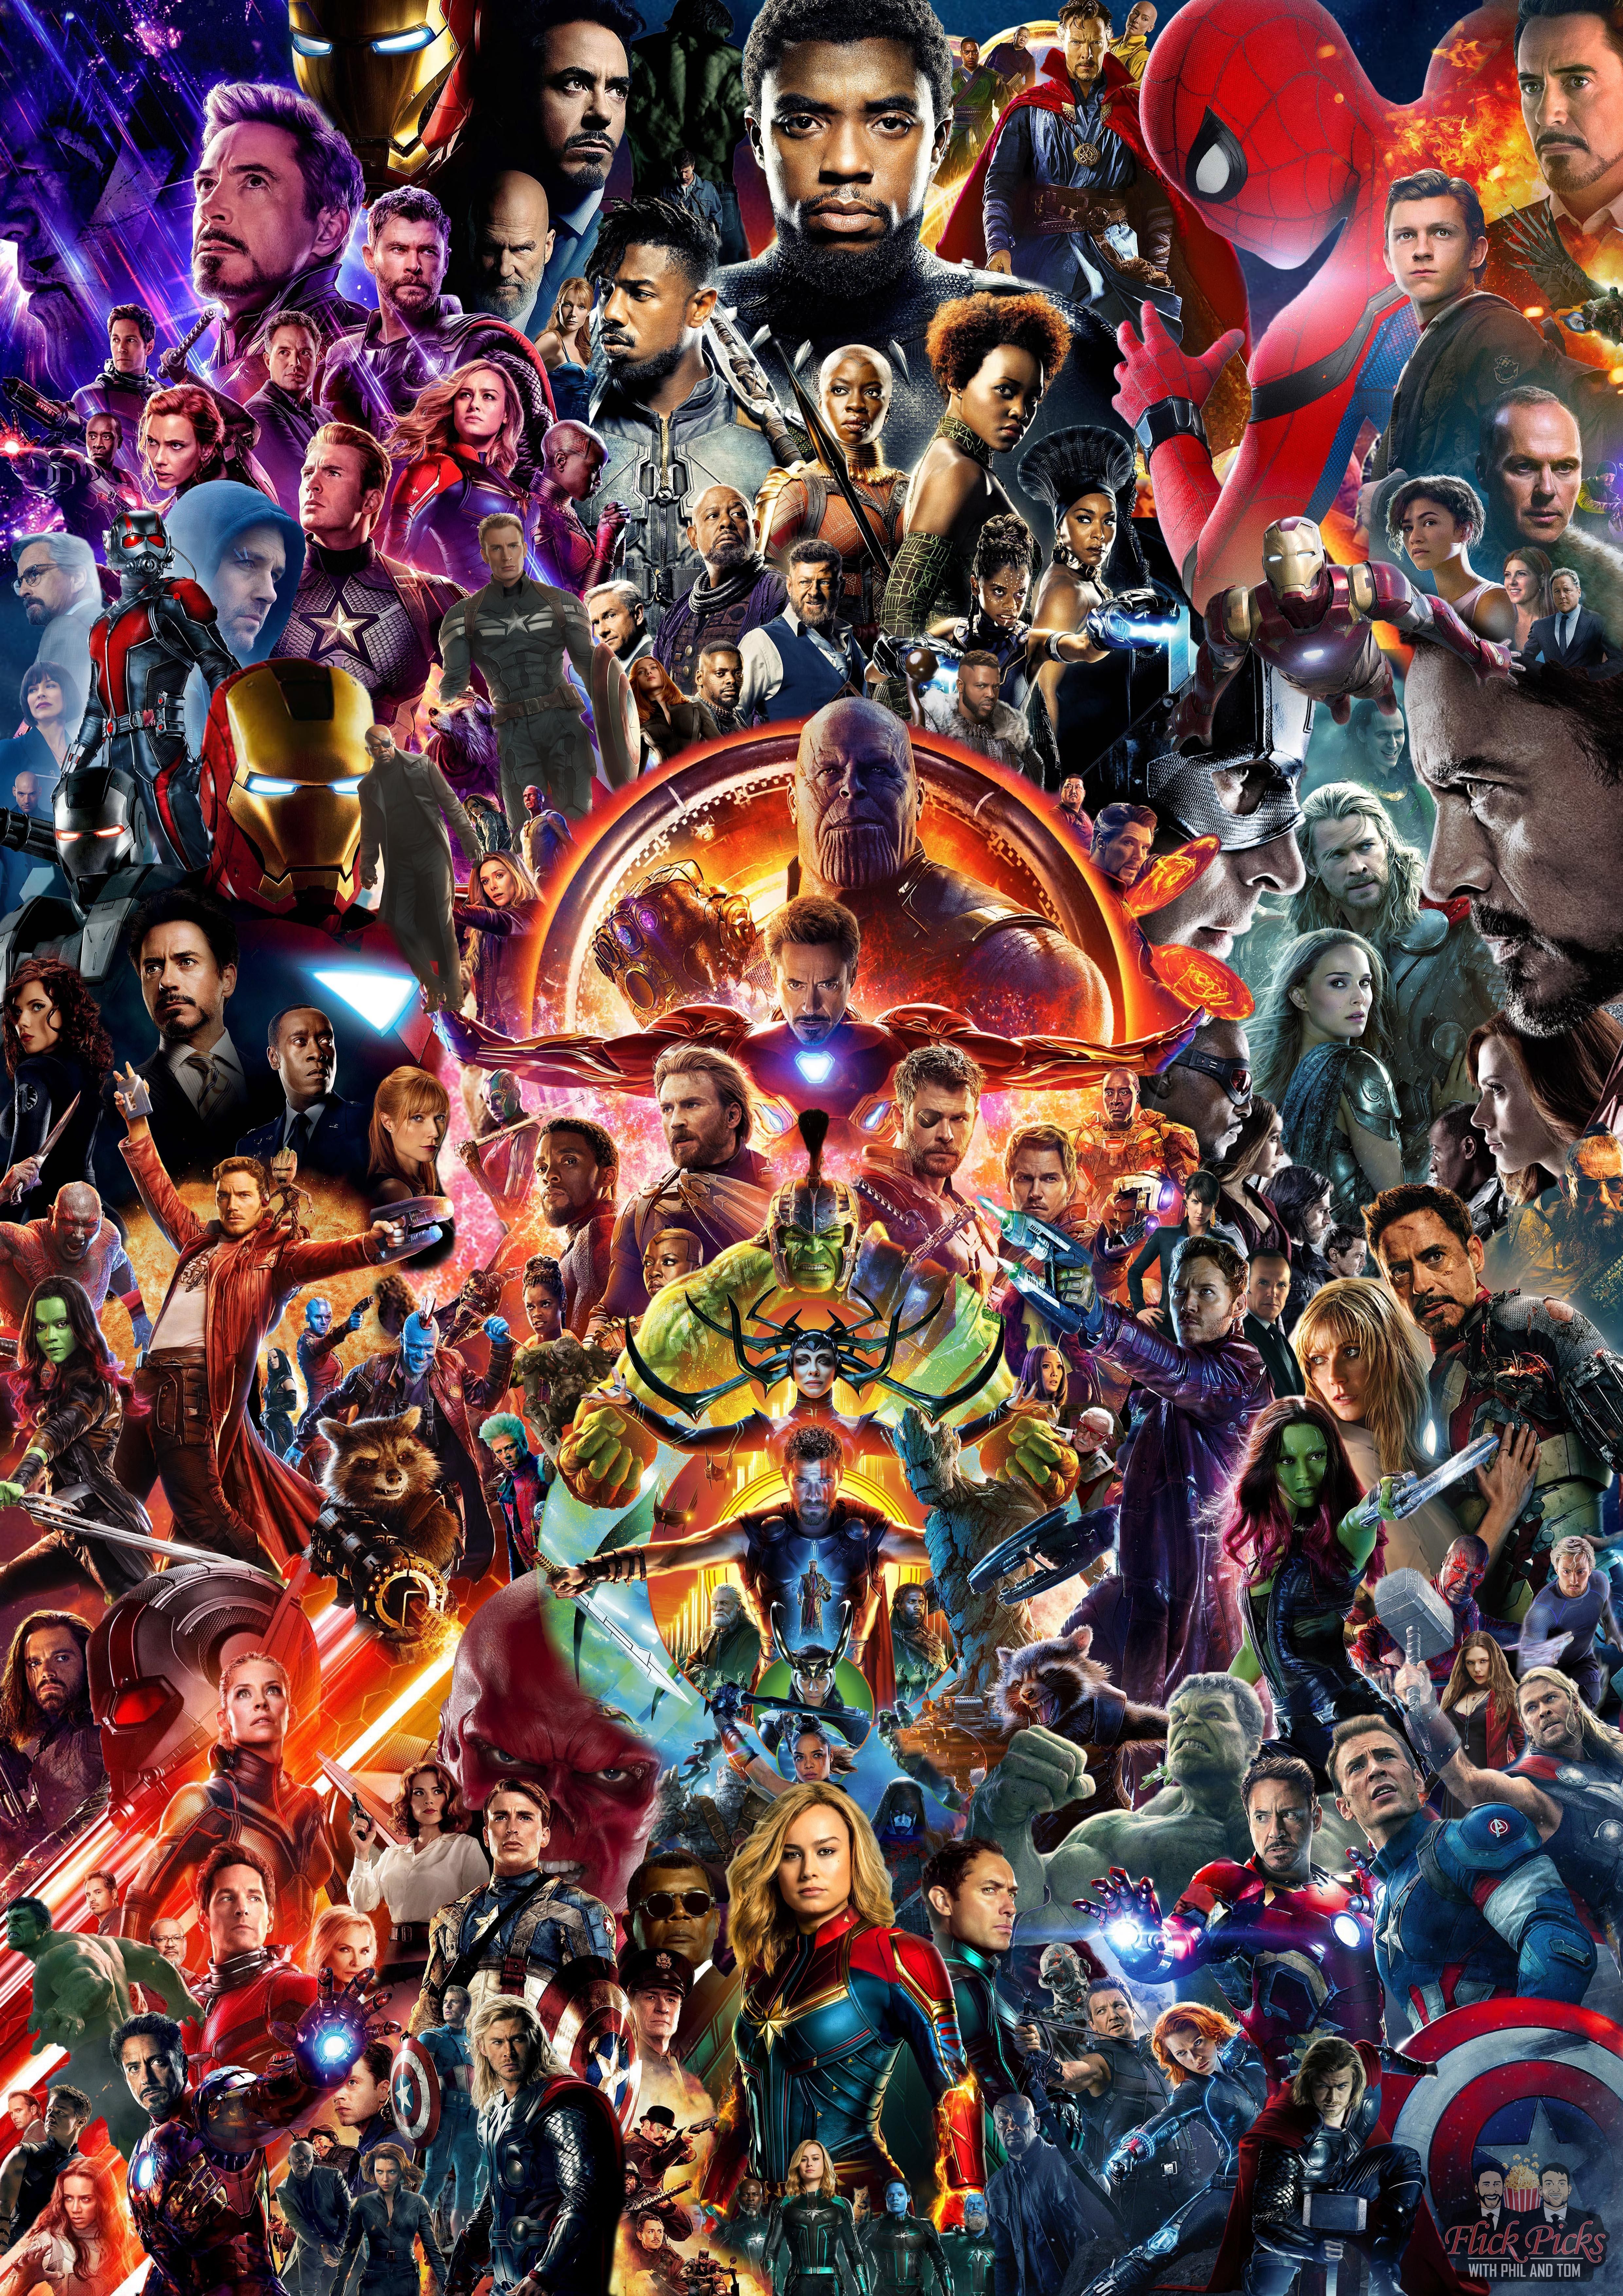 Marvel Posters Wallpaper Free Marvel Posters Background